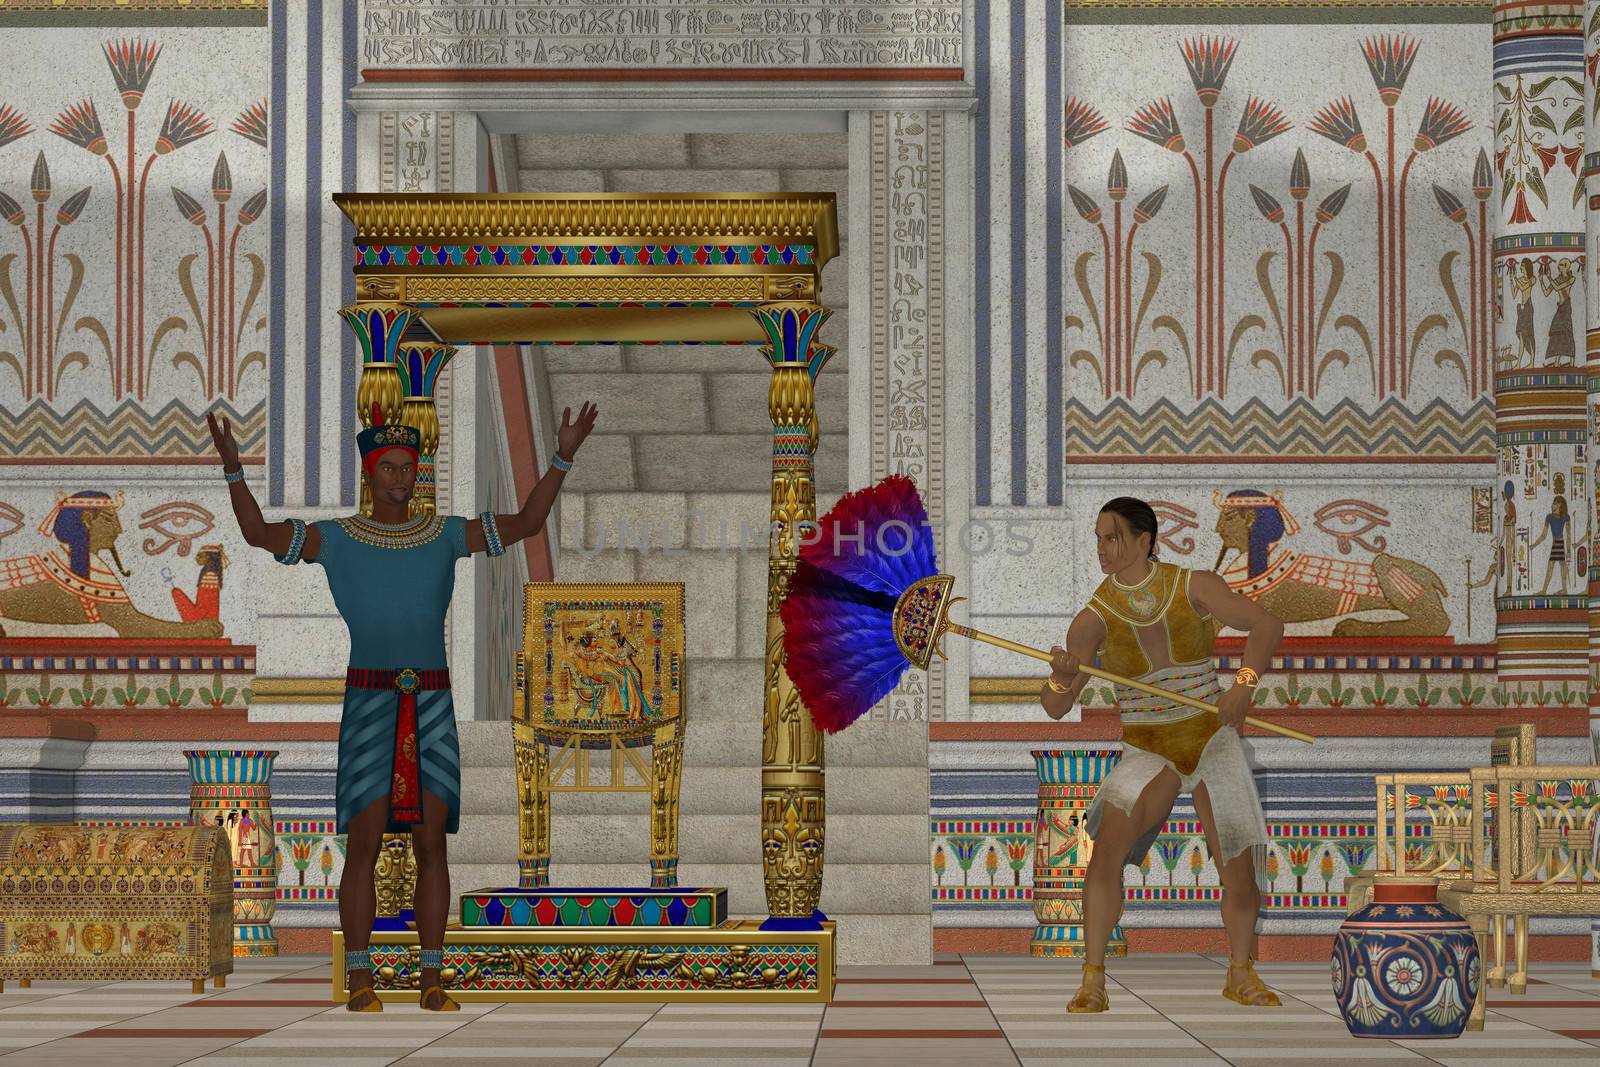 A servant fans the Pharaoh as he talks to his subjects in an Egyptian palace.